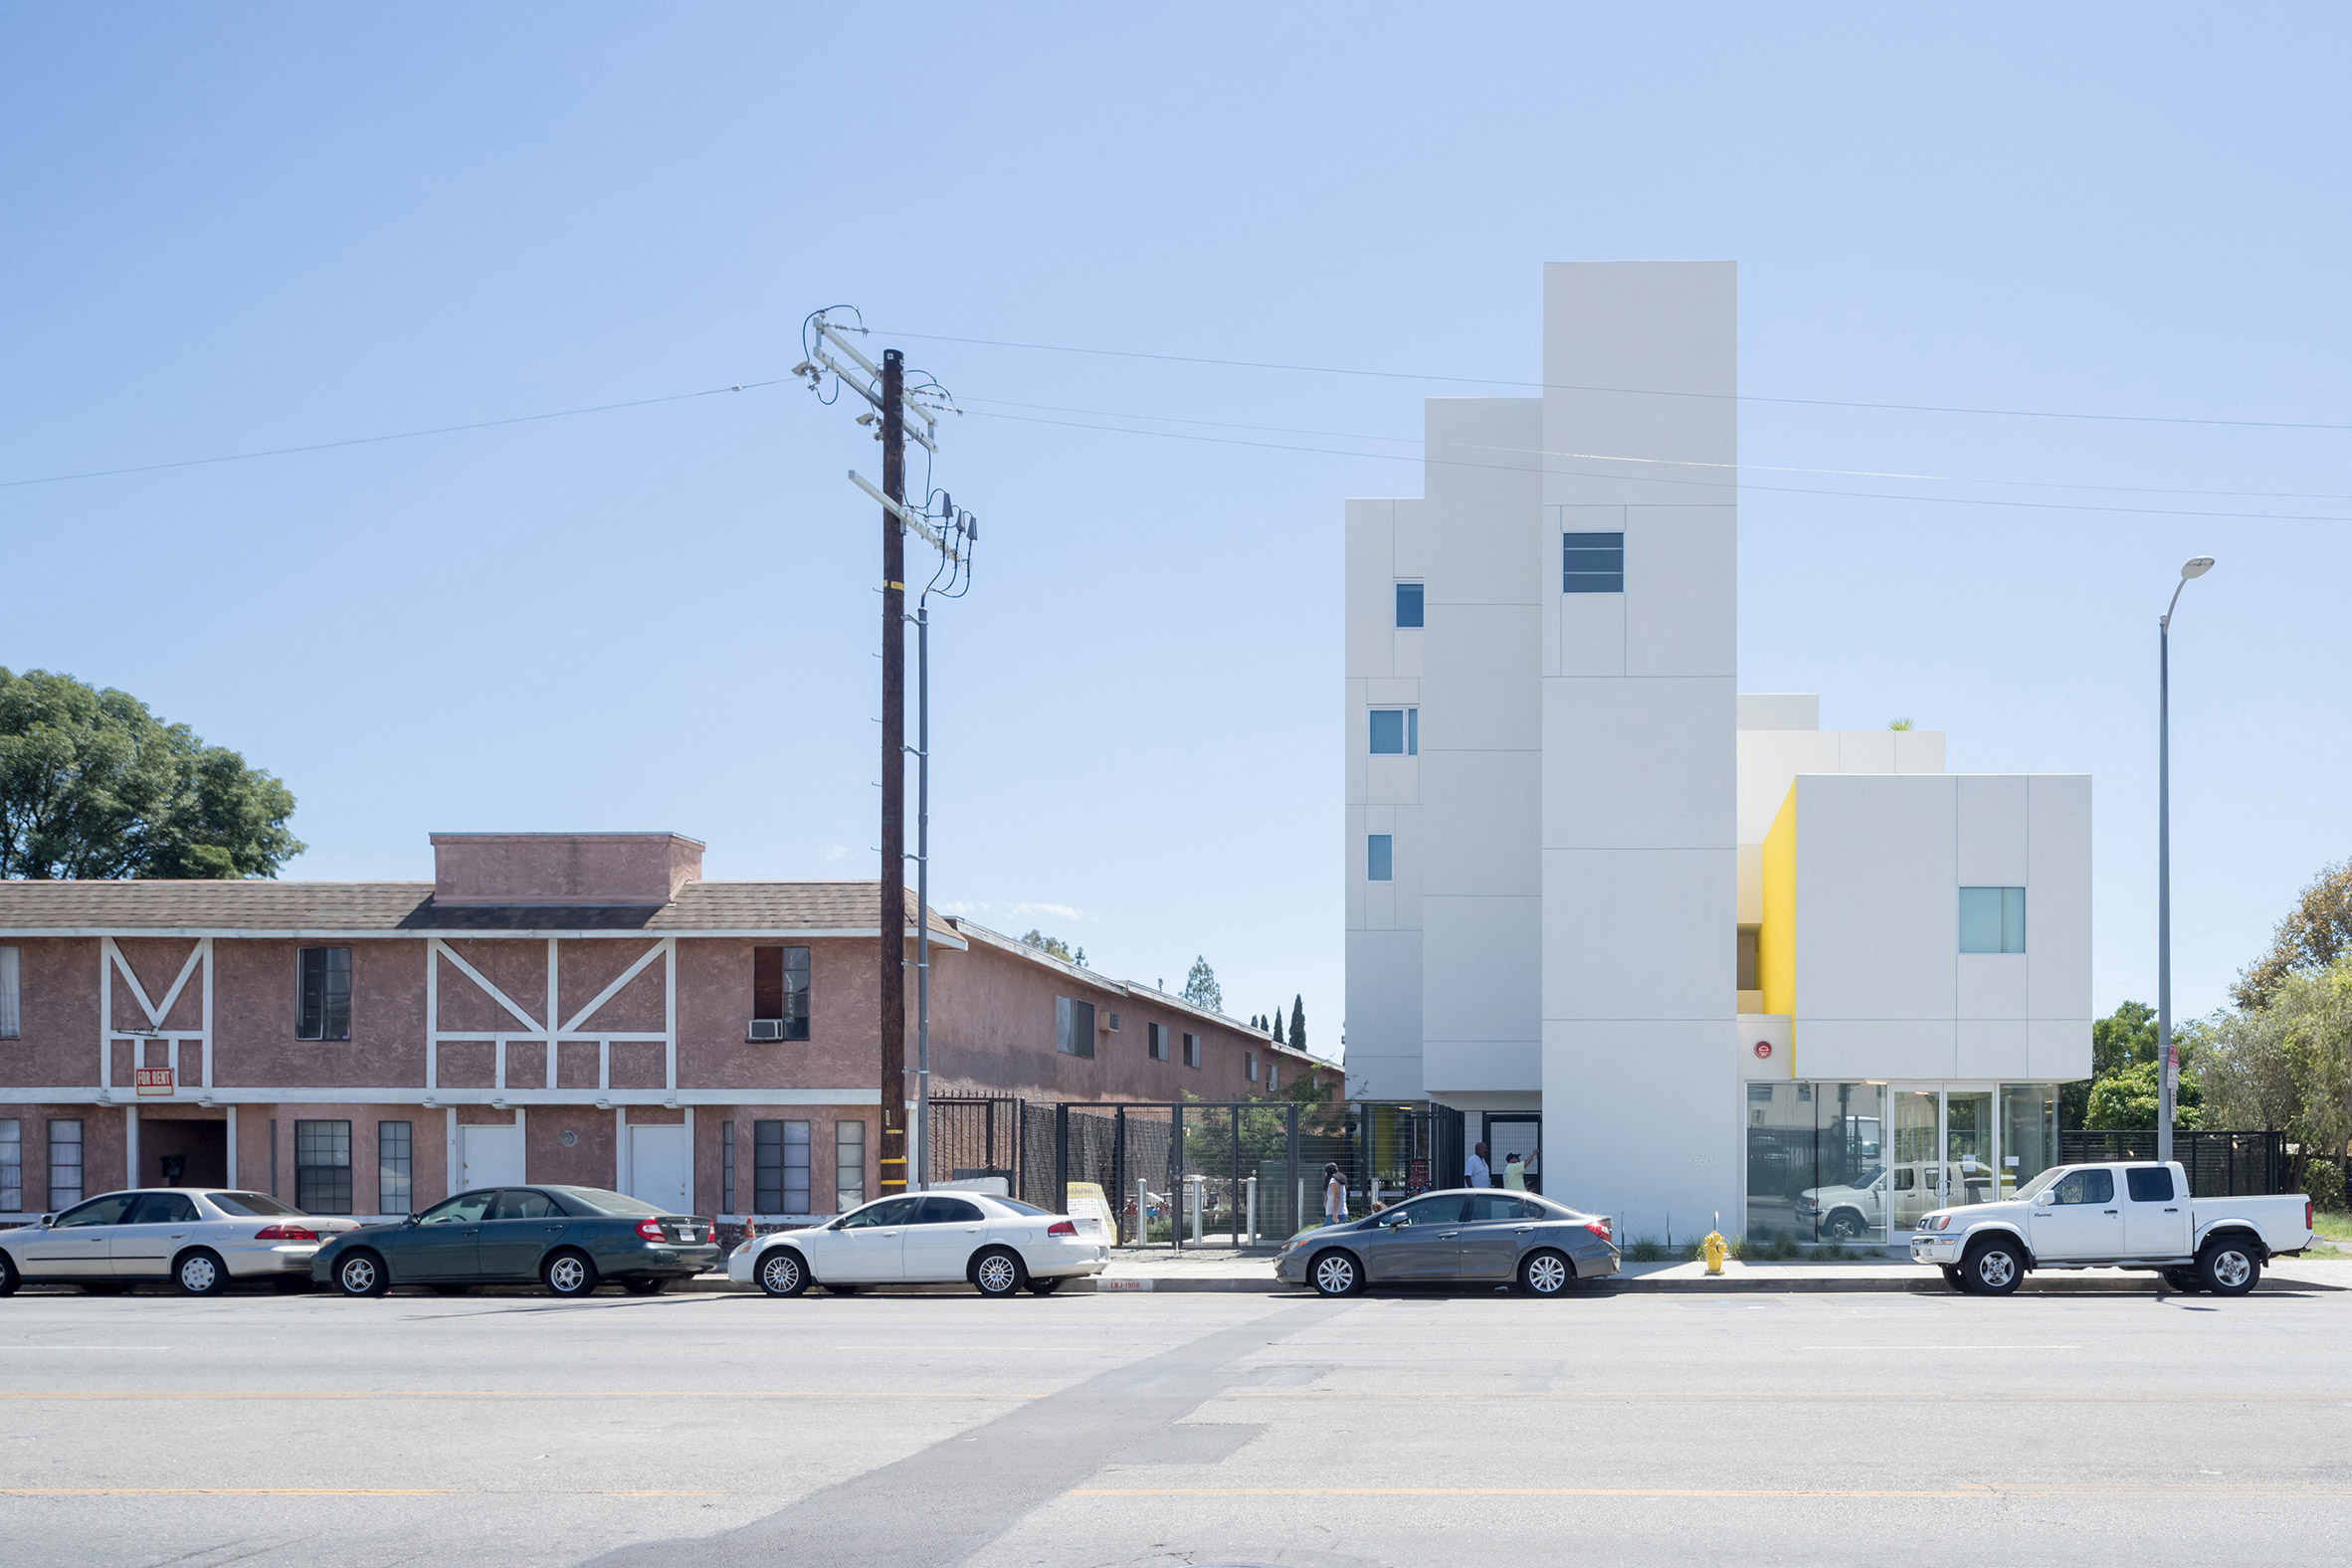 Michael Maltzan's Crest Apartments provide housing for southern California's homeless